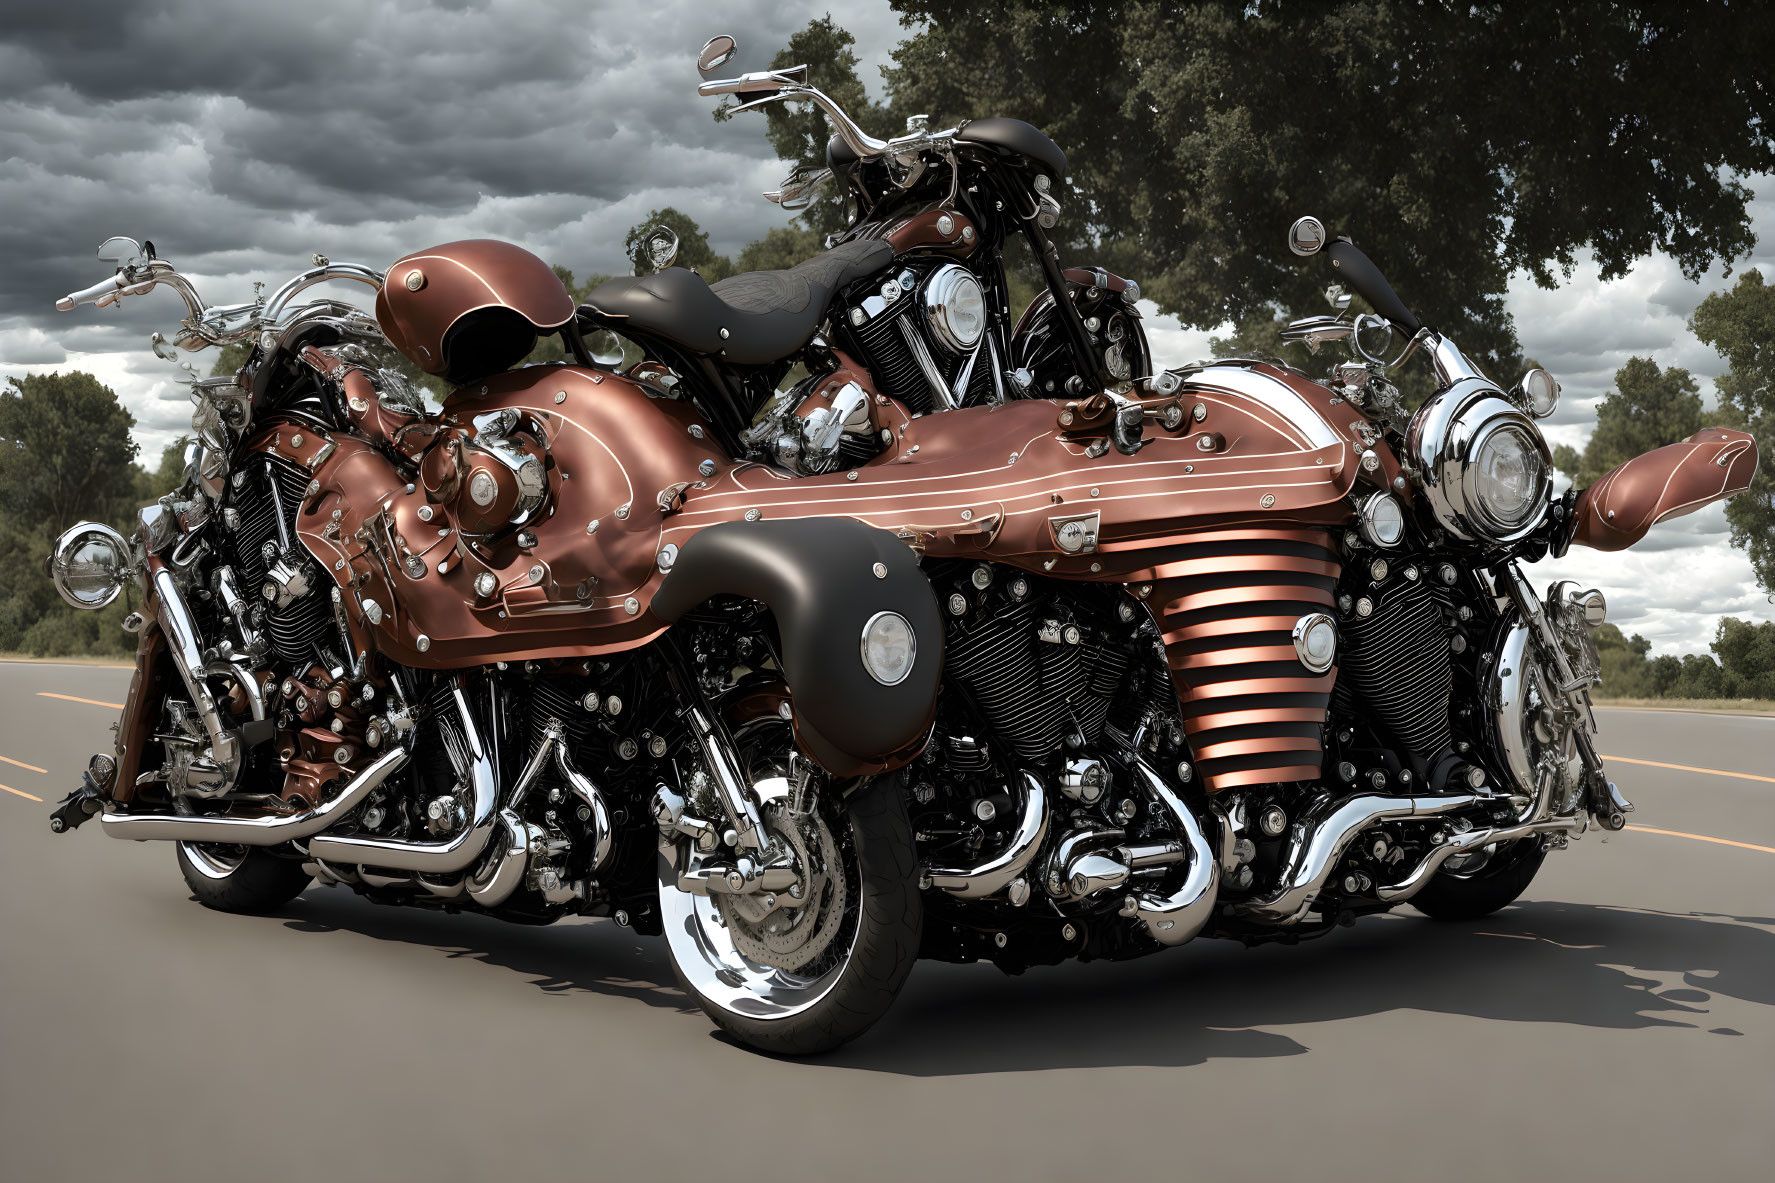 Customized Twin-Engine Motorcycle with Copper and Black Color Scheme